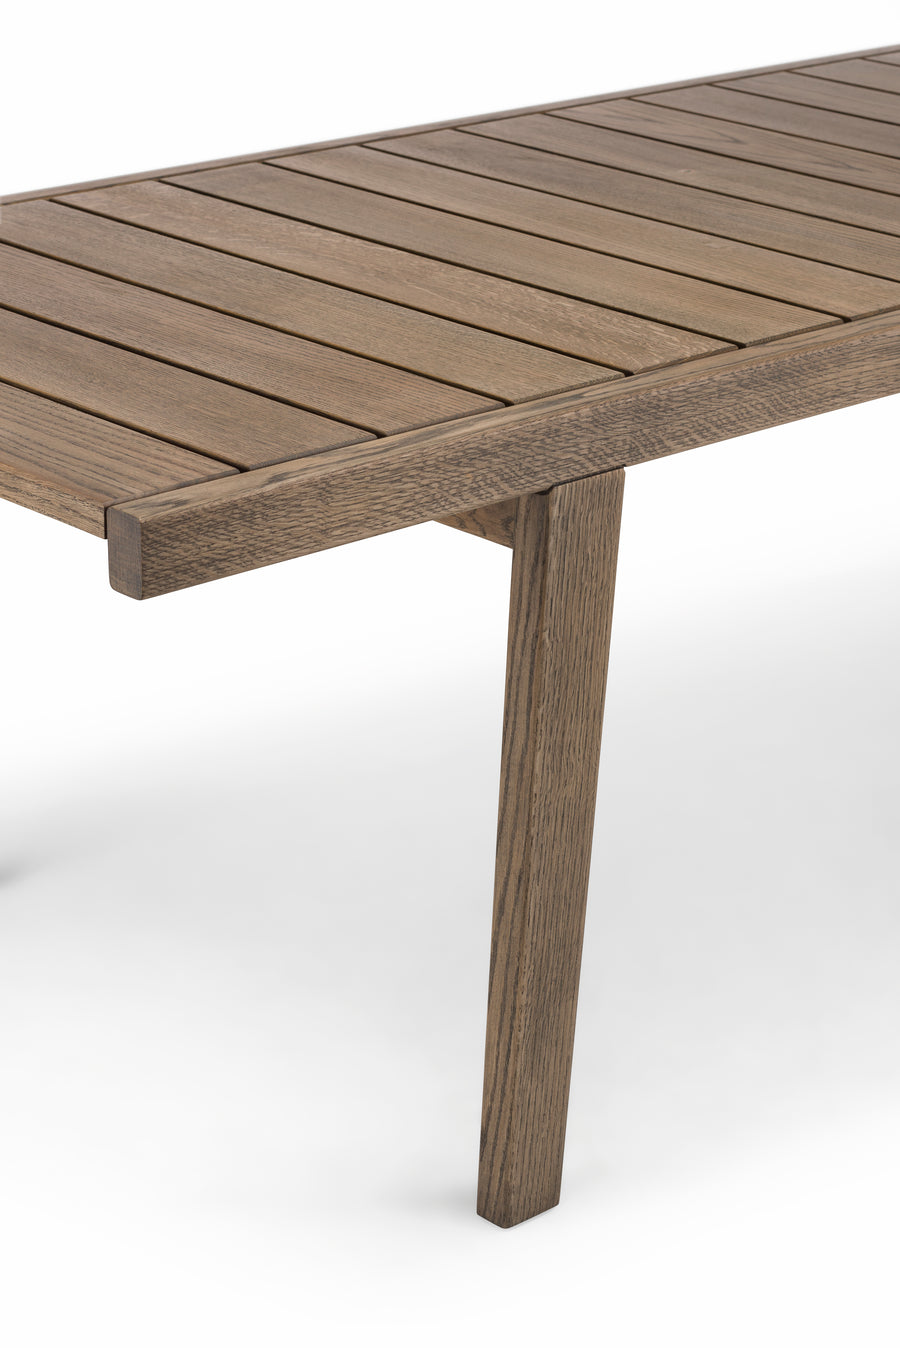 98.6°F OUTDOOR DINING TABLE